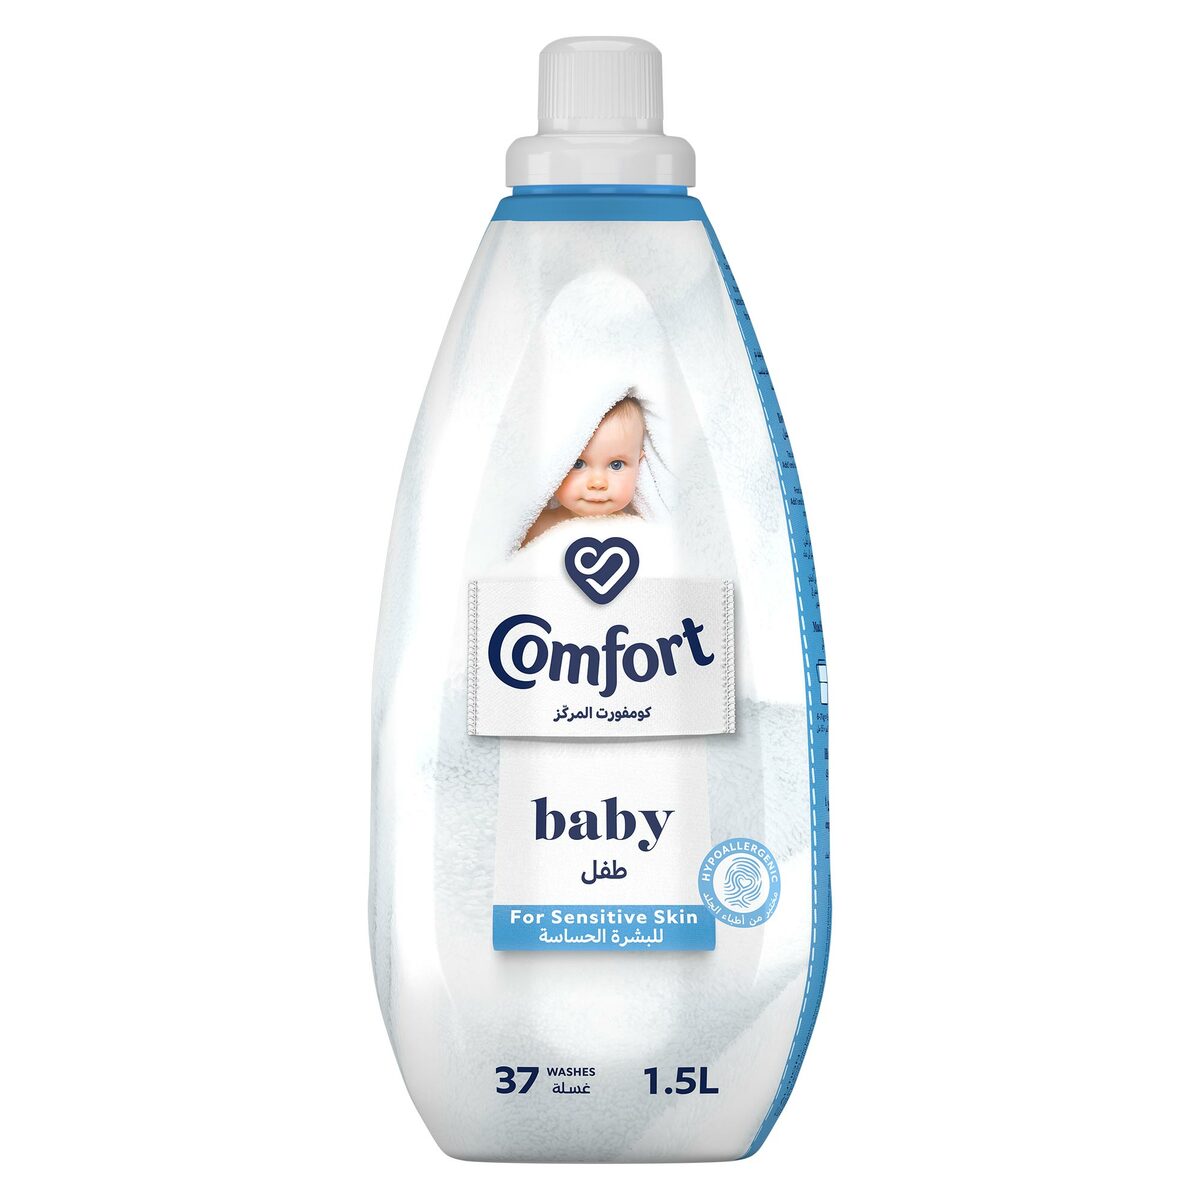 Comfort Concentrated Fabric Softener For Baby Sensitive Skin 1.5Litre